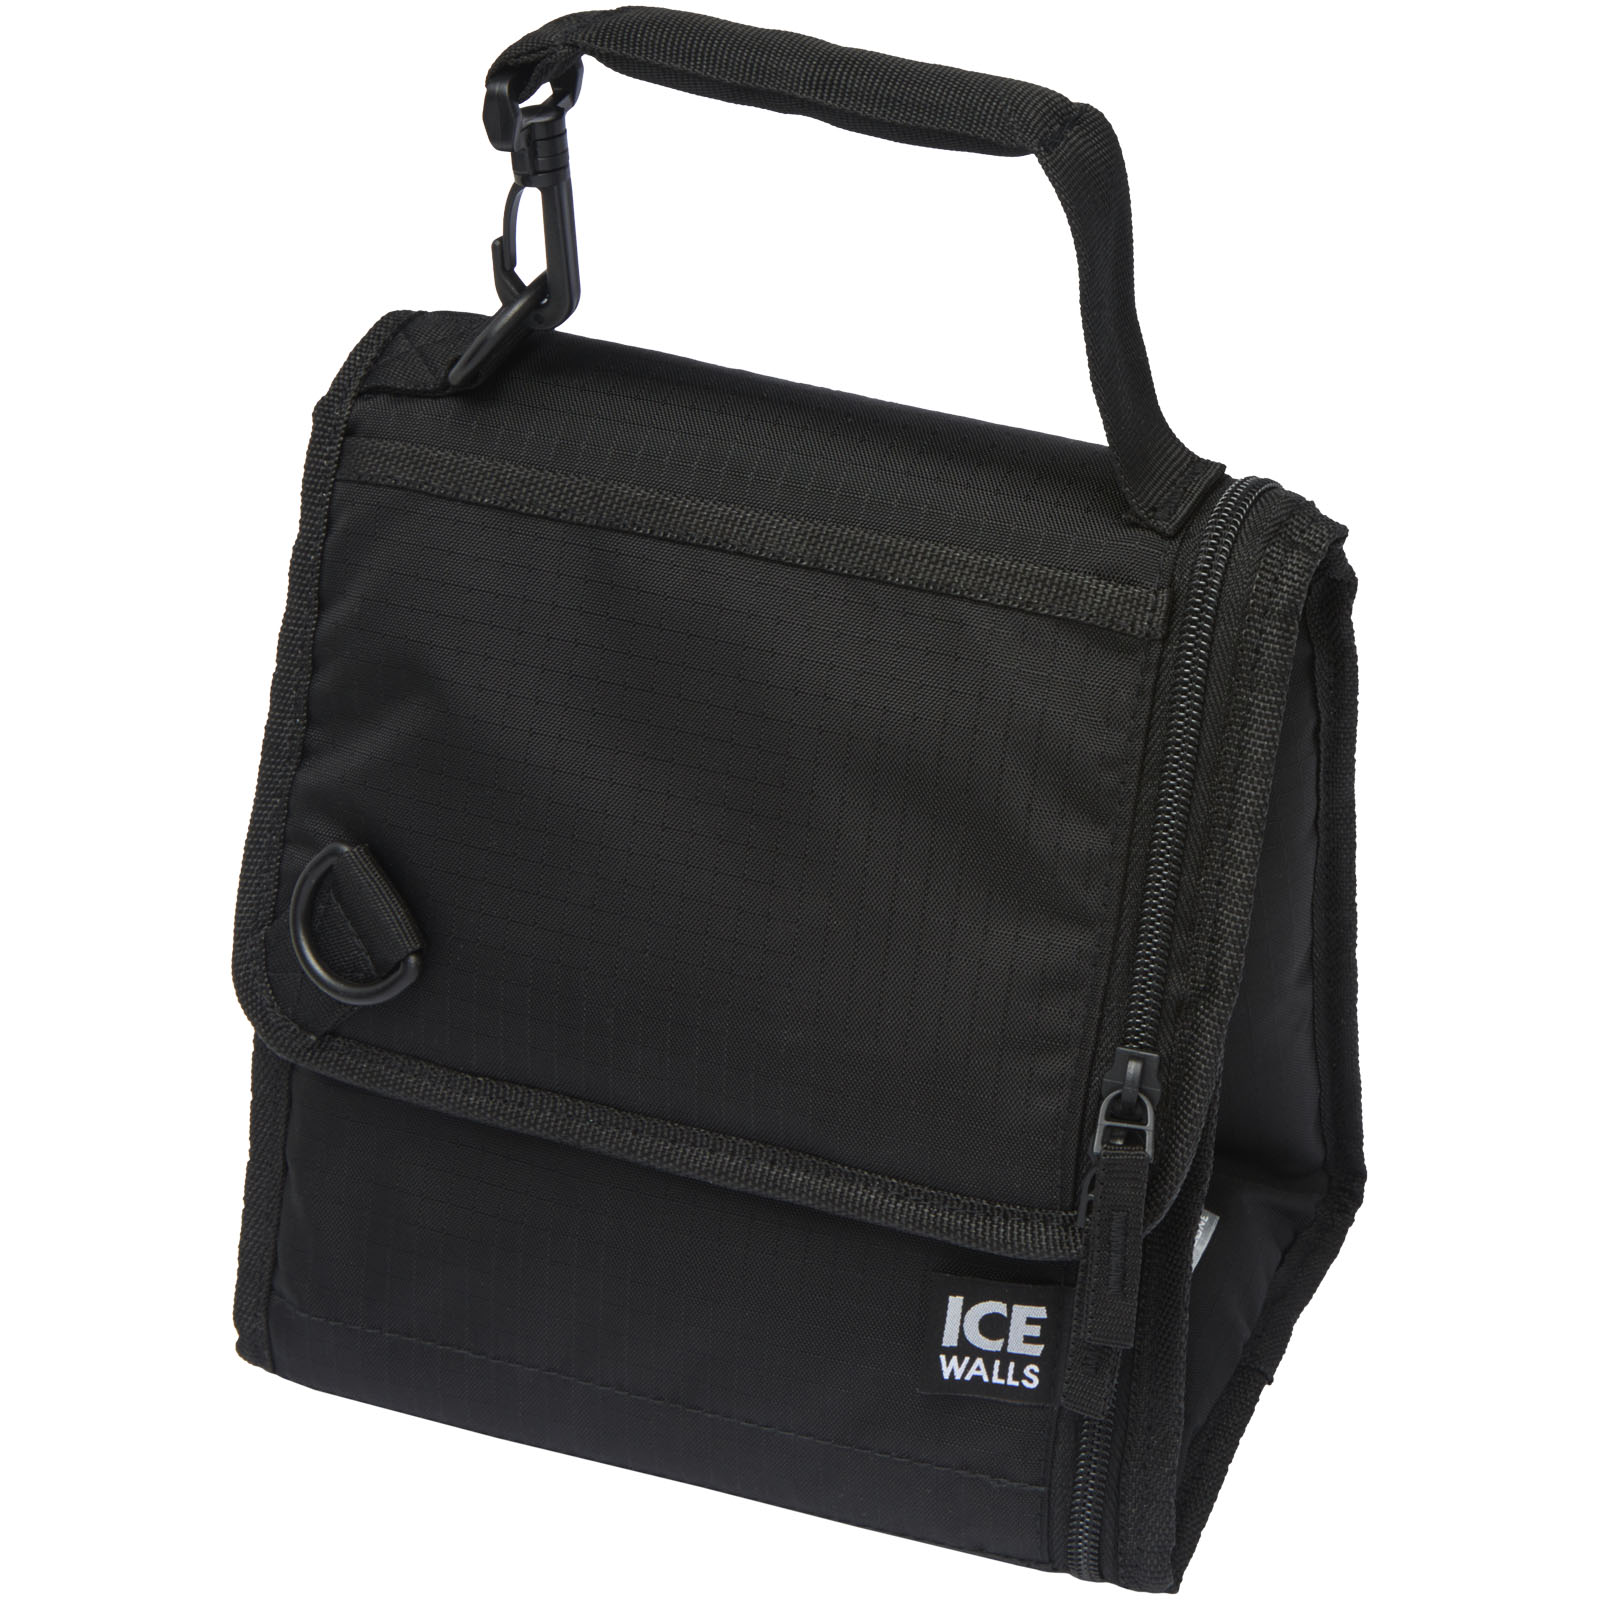 Innovative Lunch Cooler Bag with Removable Reusable Ice Packs - Eastleach